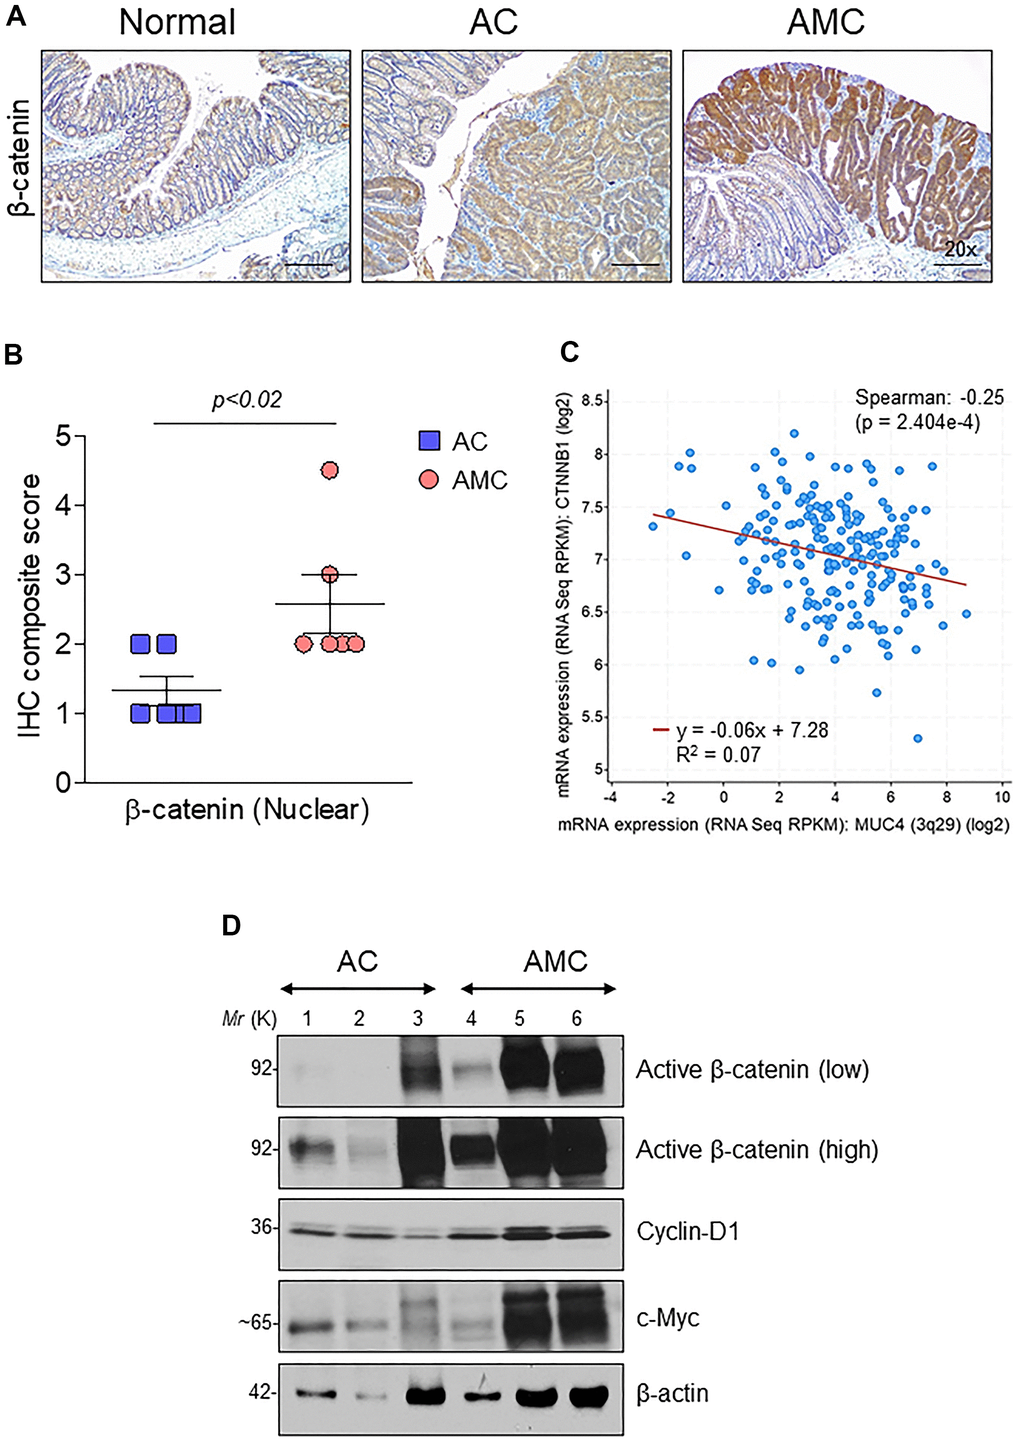 Muc4 deletion results in up-regulation of β-catenin signaling. (A) Immunohistochemical analysis of β-catenin in normal, AC and AMC animals. n = 6 (AC and AMC) and n=3 for normal group. (B) IHC composite score of nuclear β-catenin staining in AC and AMIC mice (C) MUC4 and CTNNB1 (β-catenin) correlated negatively in the TCGA-COAD dataset. (D) Immunoblot of active β-catenin and its target genes: cyclin-D1 and c-Myc expression in AC and AMC animals. n = 3 per group.